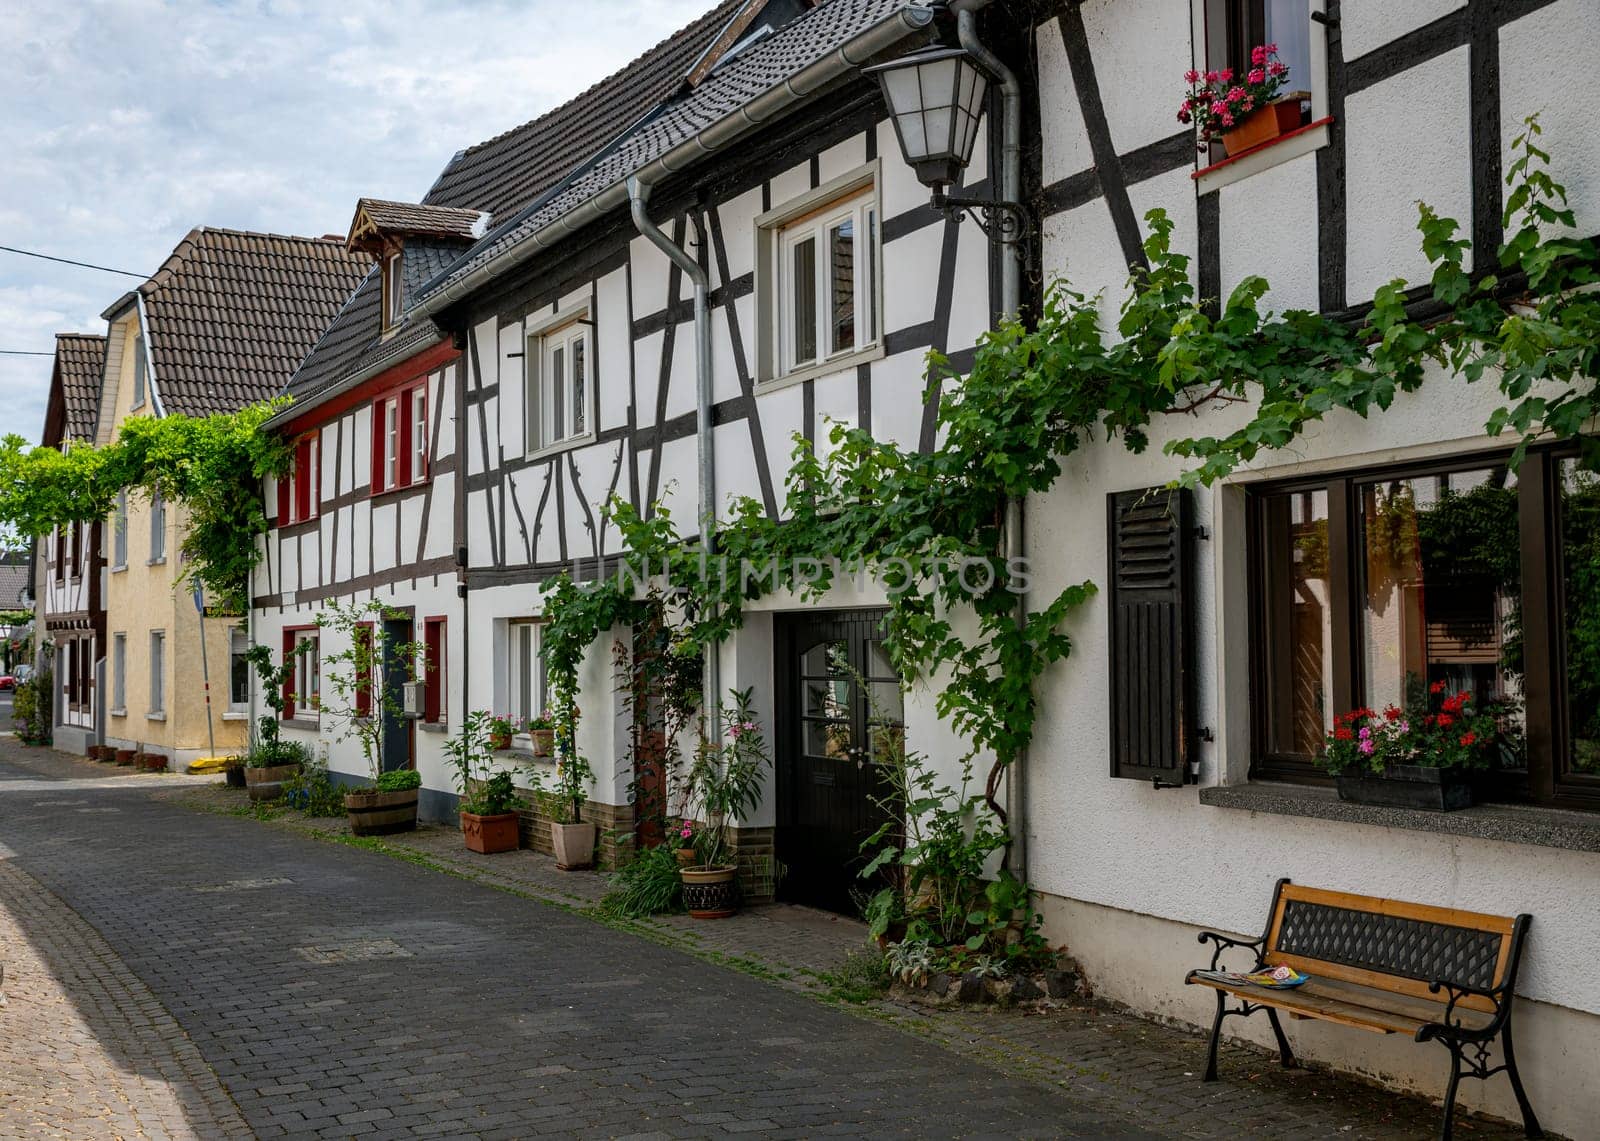 Half timbered architecture in Erpel, Rhineland Palatinate, Germany